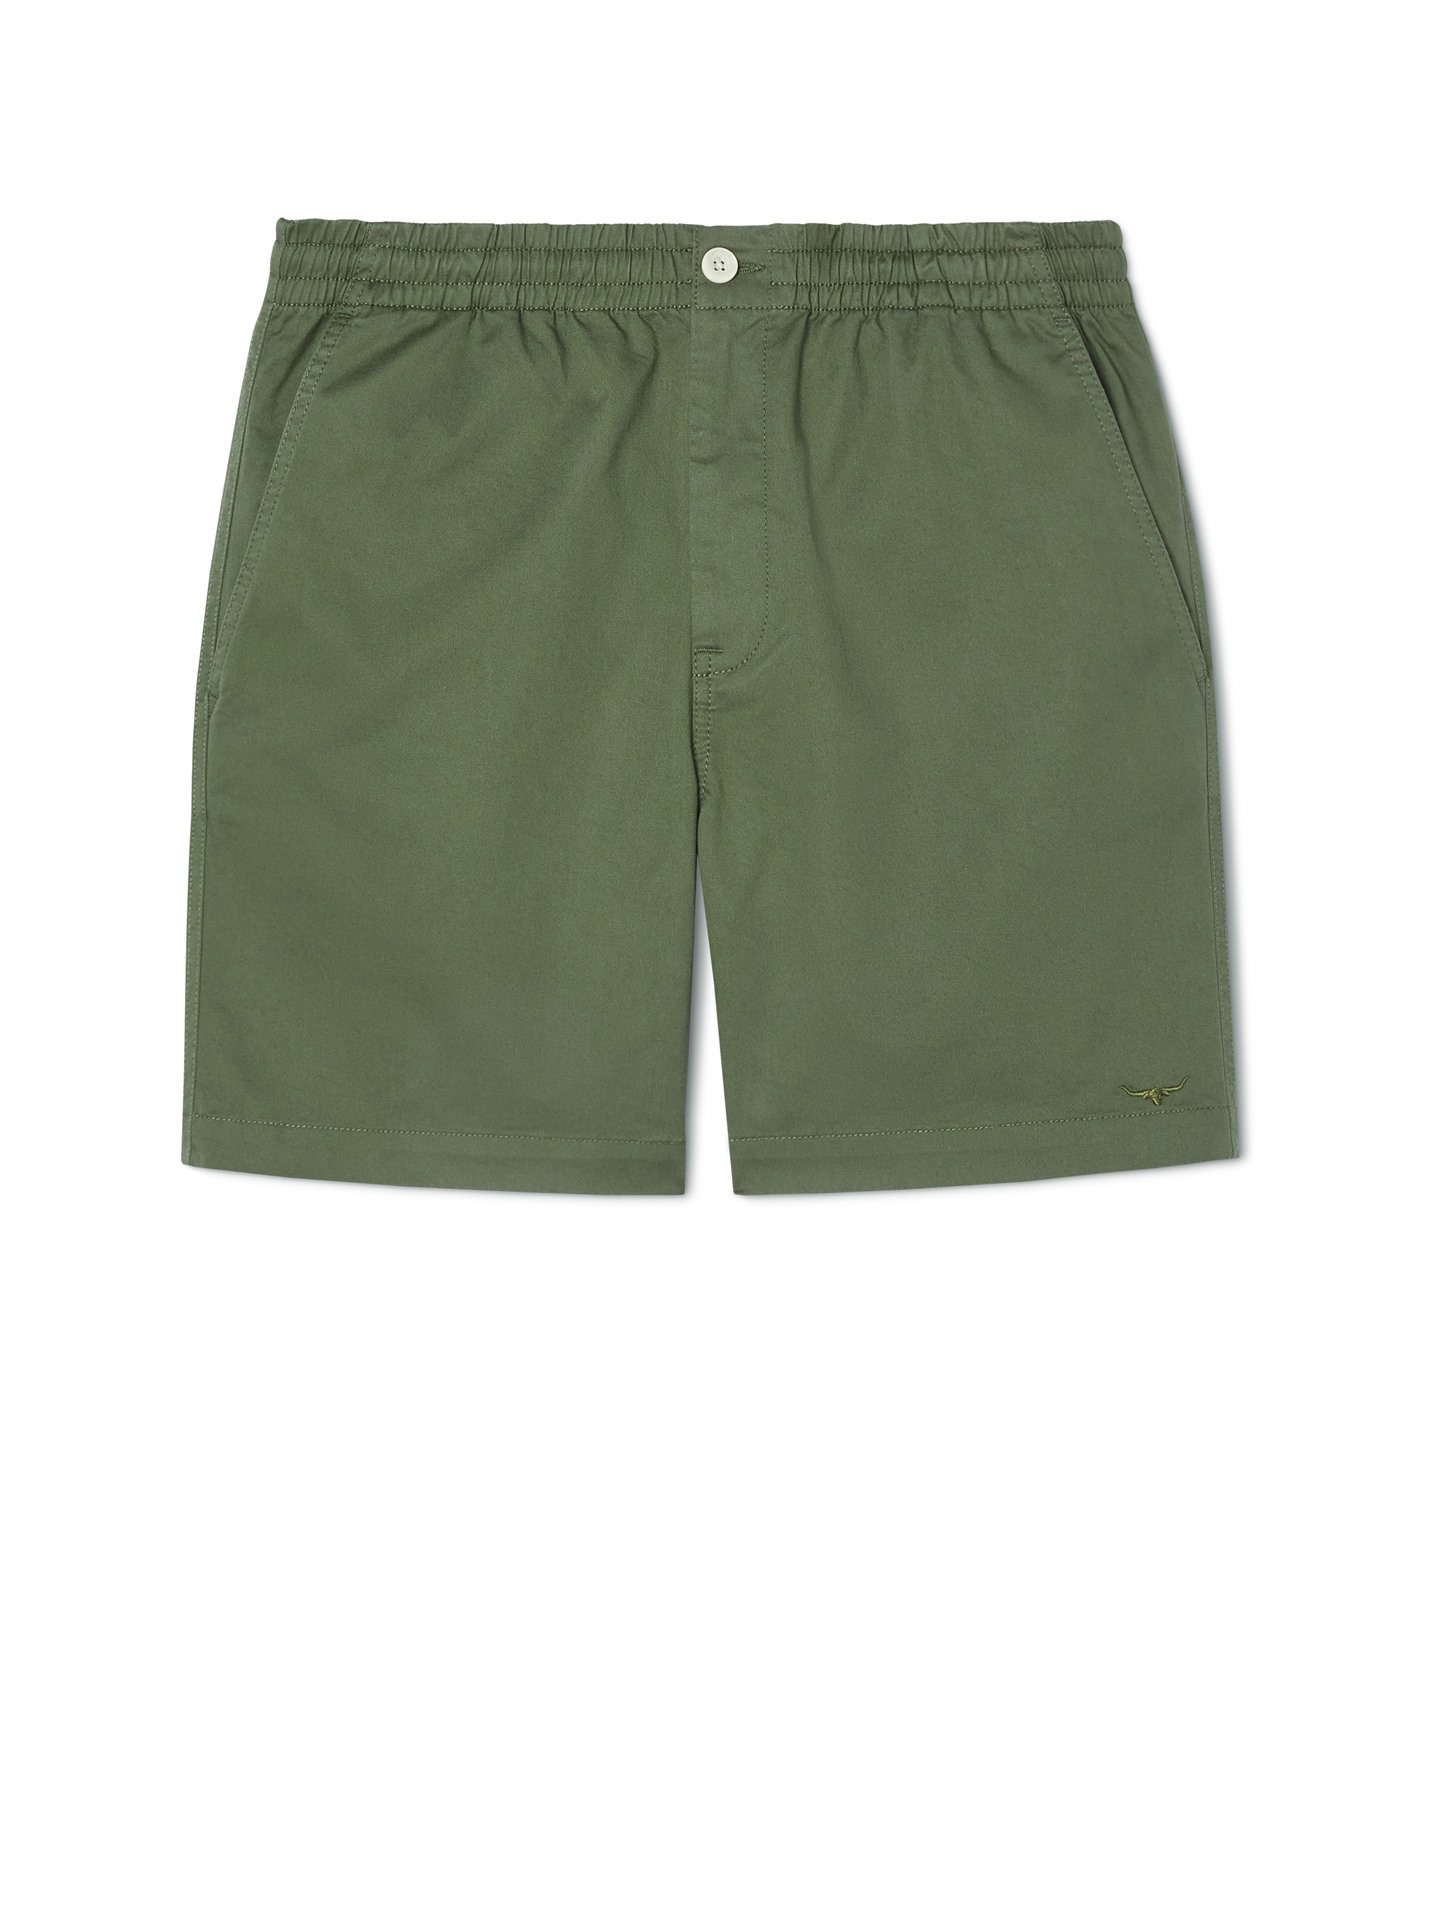 RM Williams Rugby Shorts Heritage Green | Port Phillip Shop